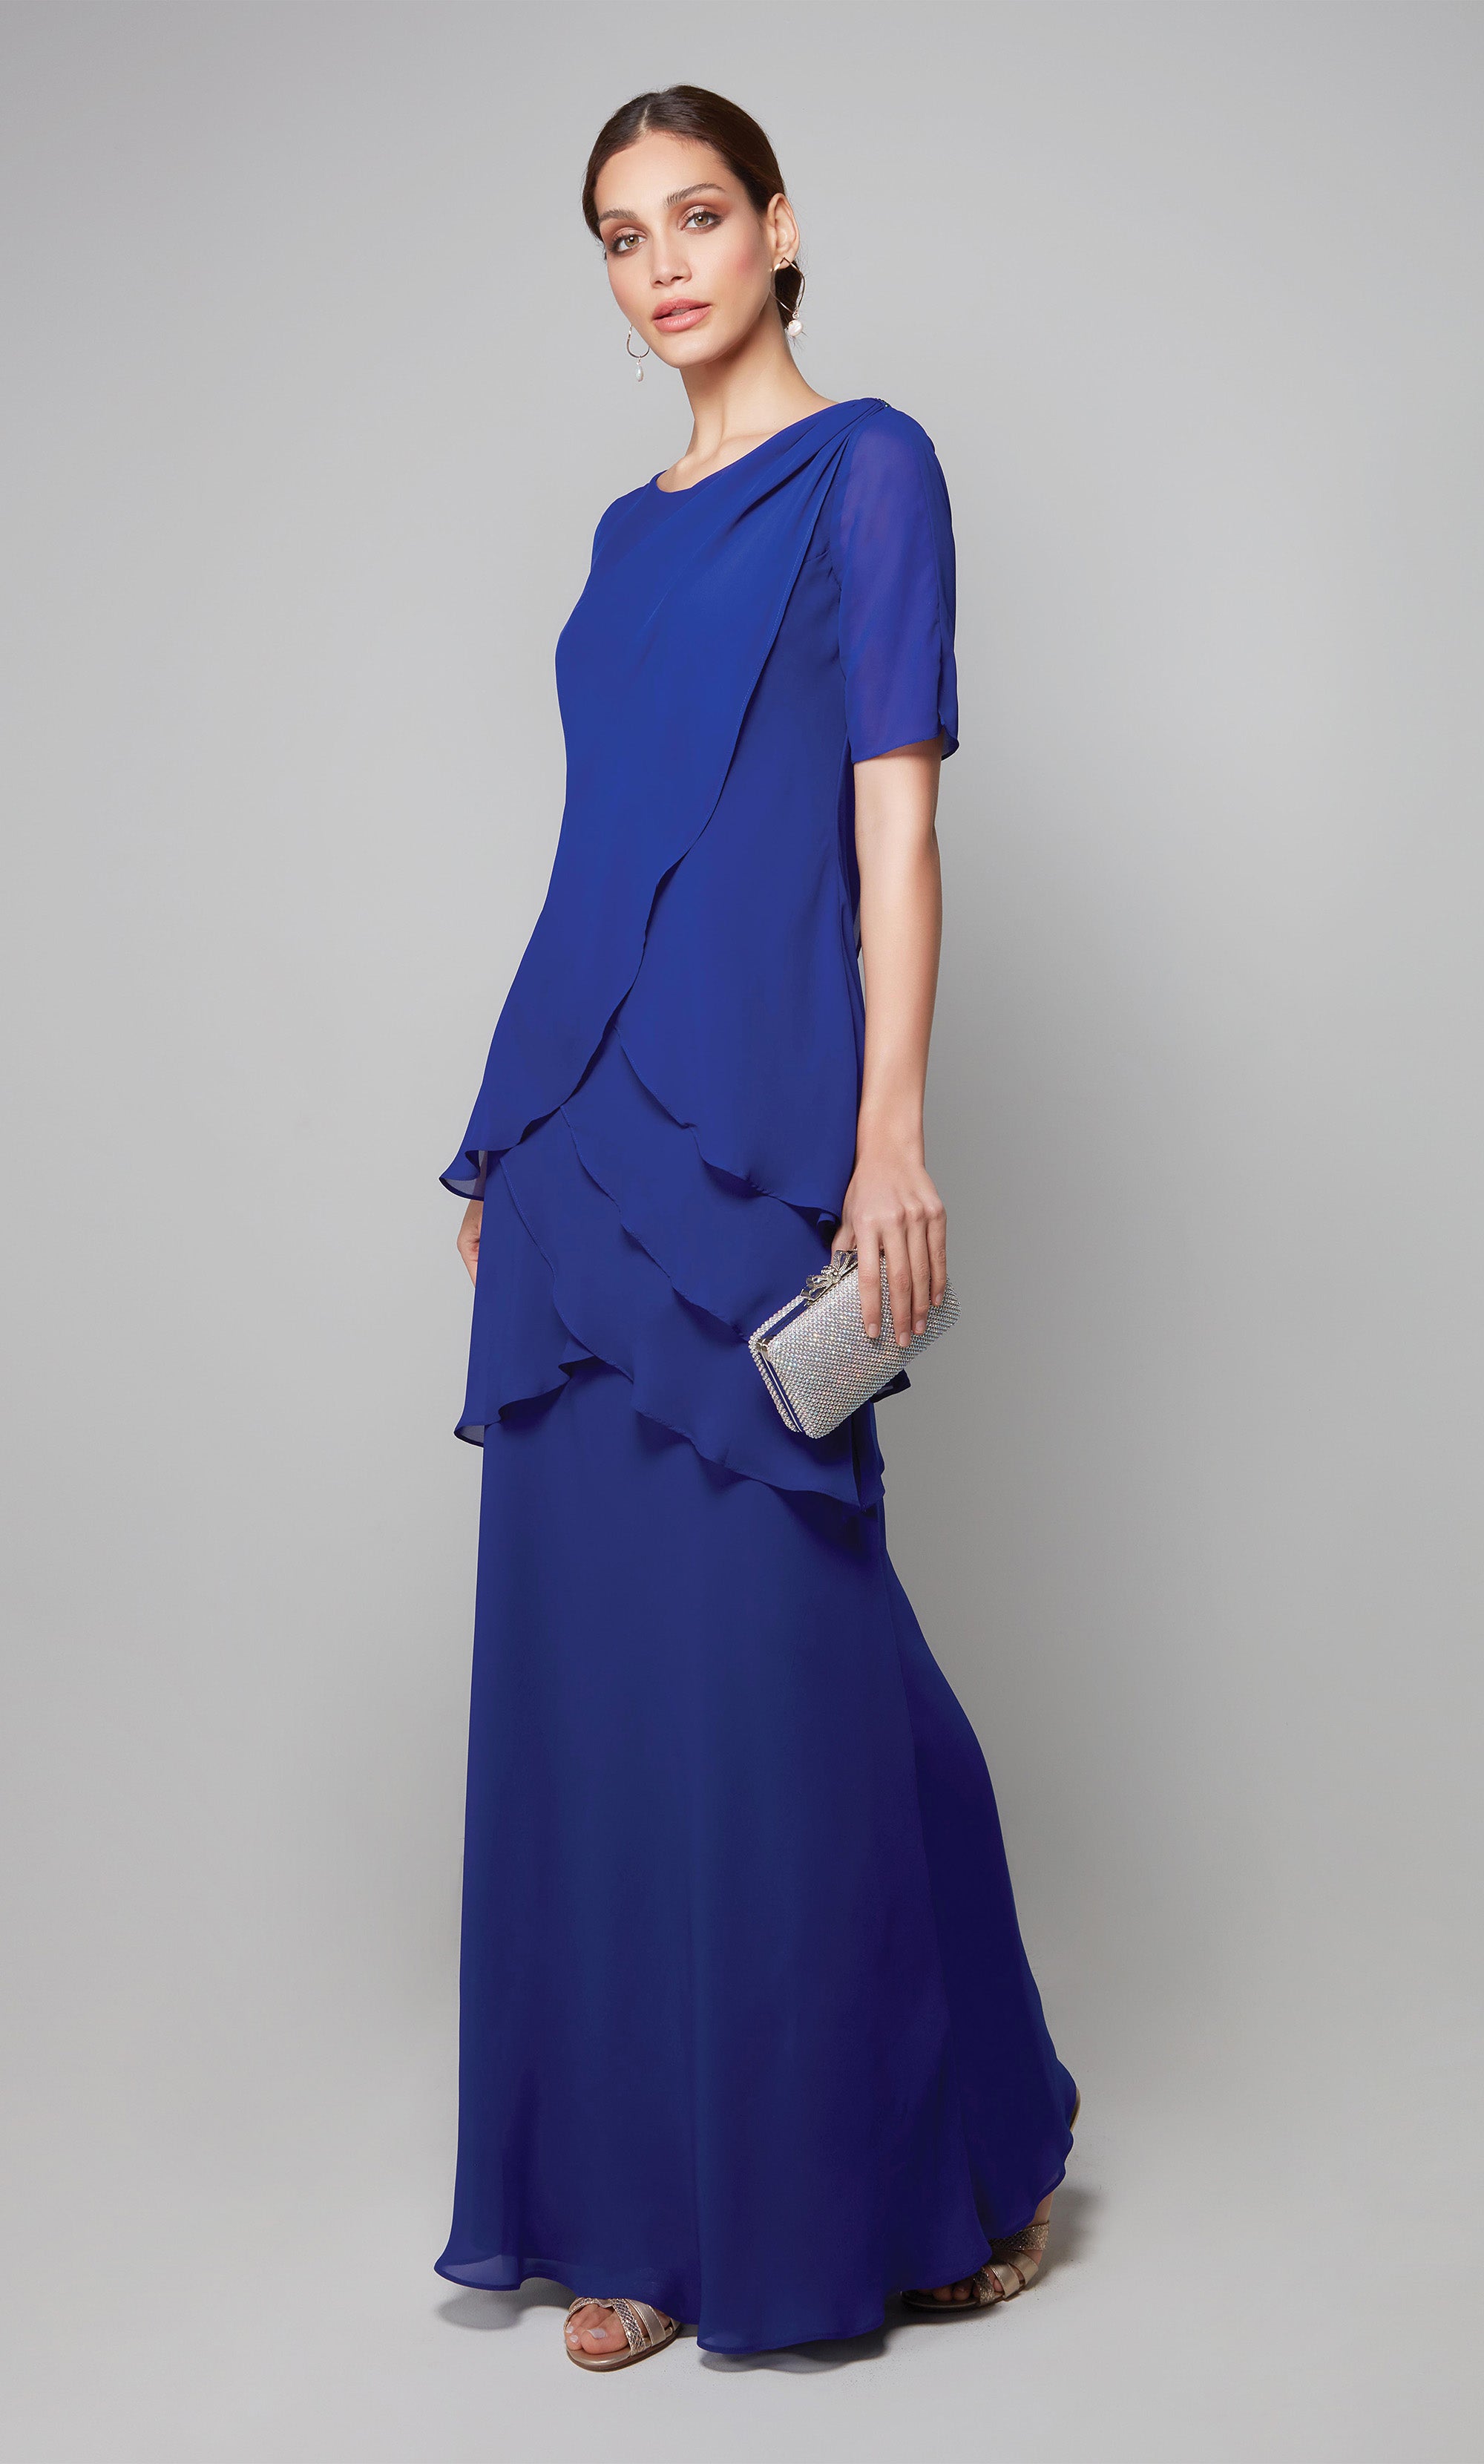 Chiffon elegant guest of wedding dress with short sleeves in cobalt blue. Color-SWATCH_27593__COBALT